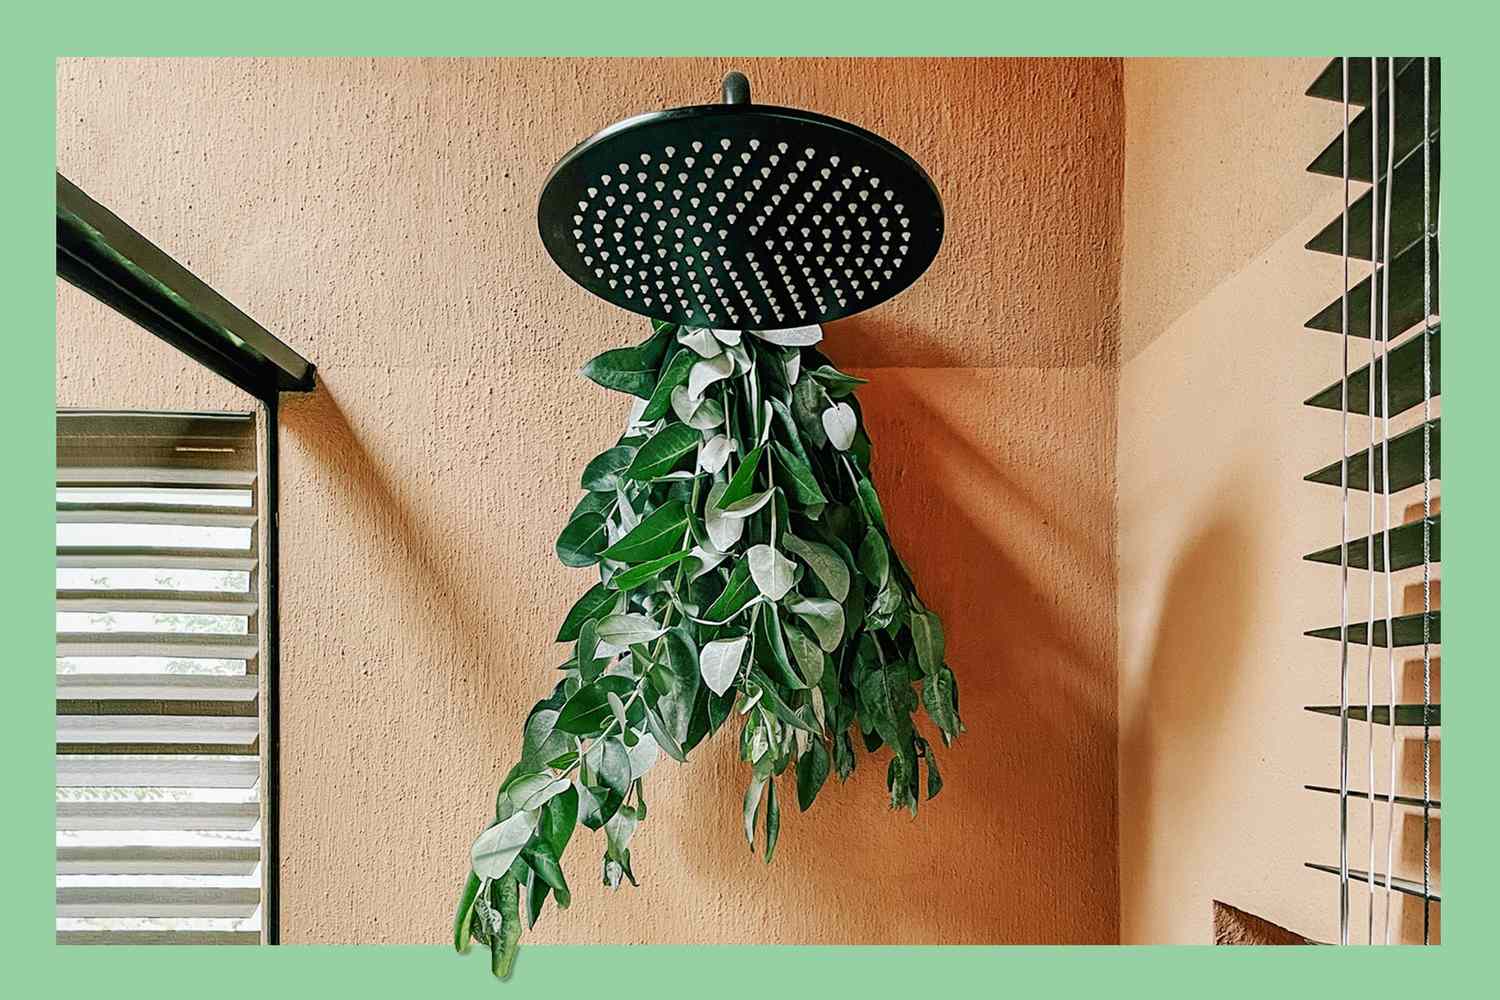 Shower With Aromatherapy. Eucalyptus plant hanging from shower